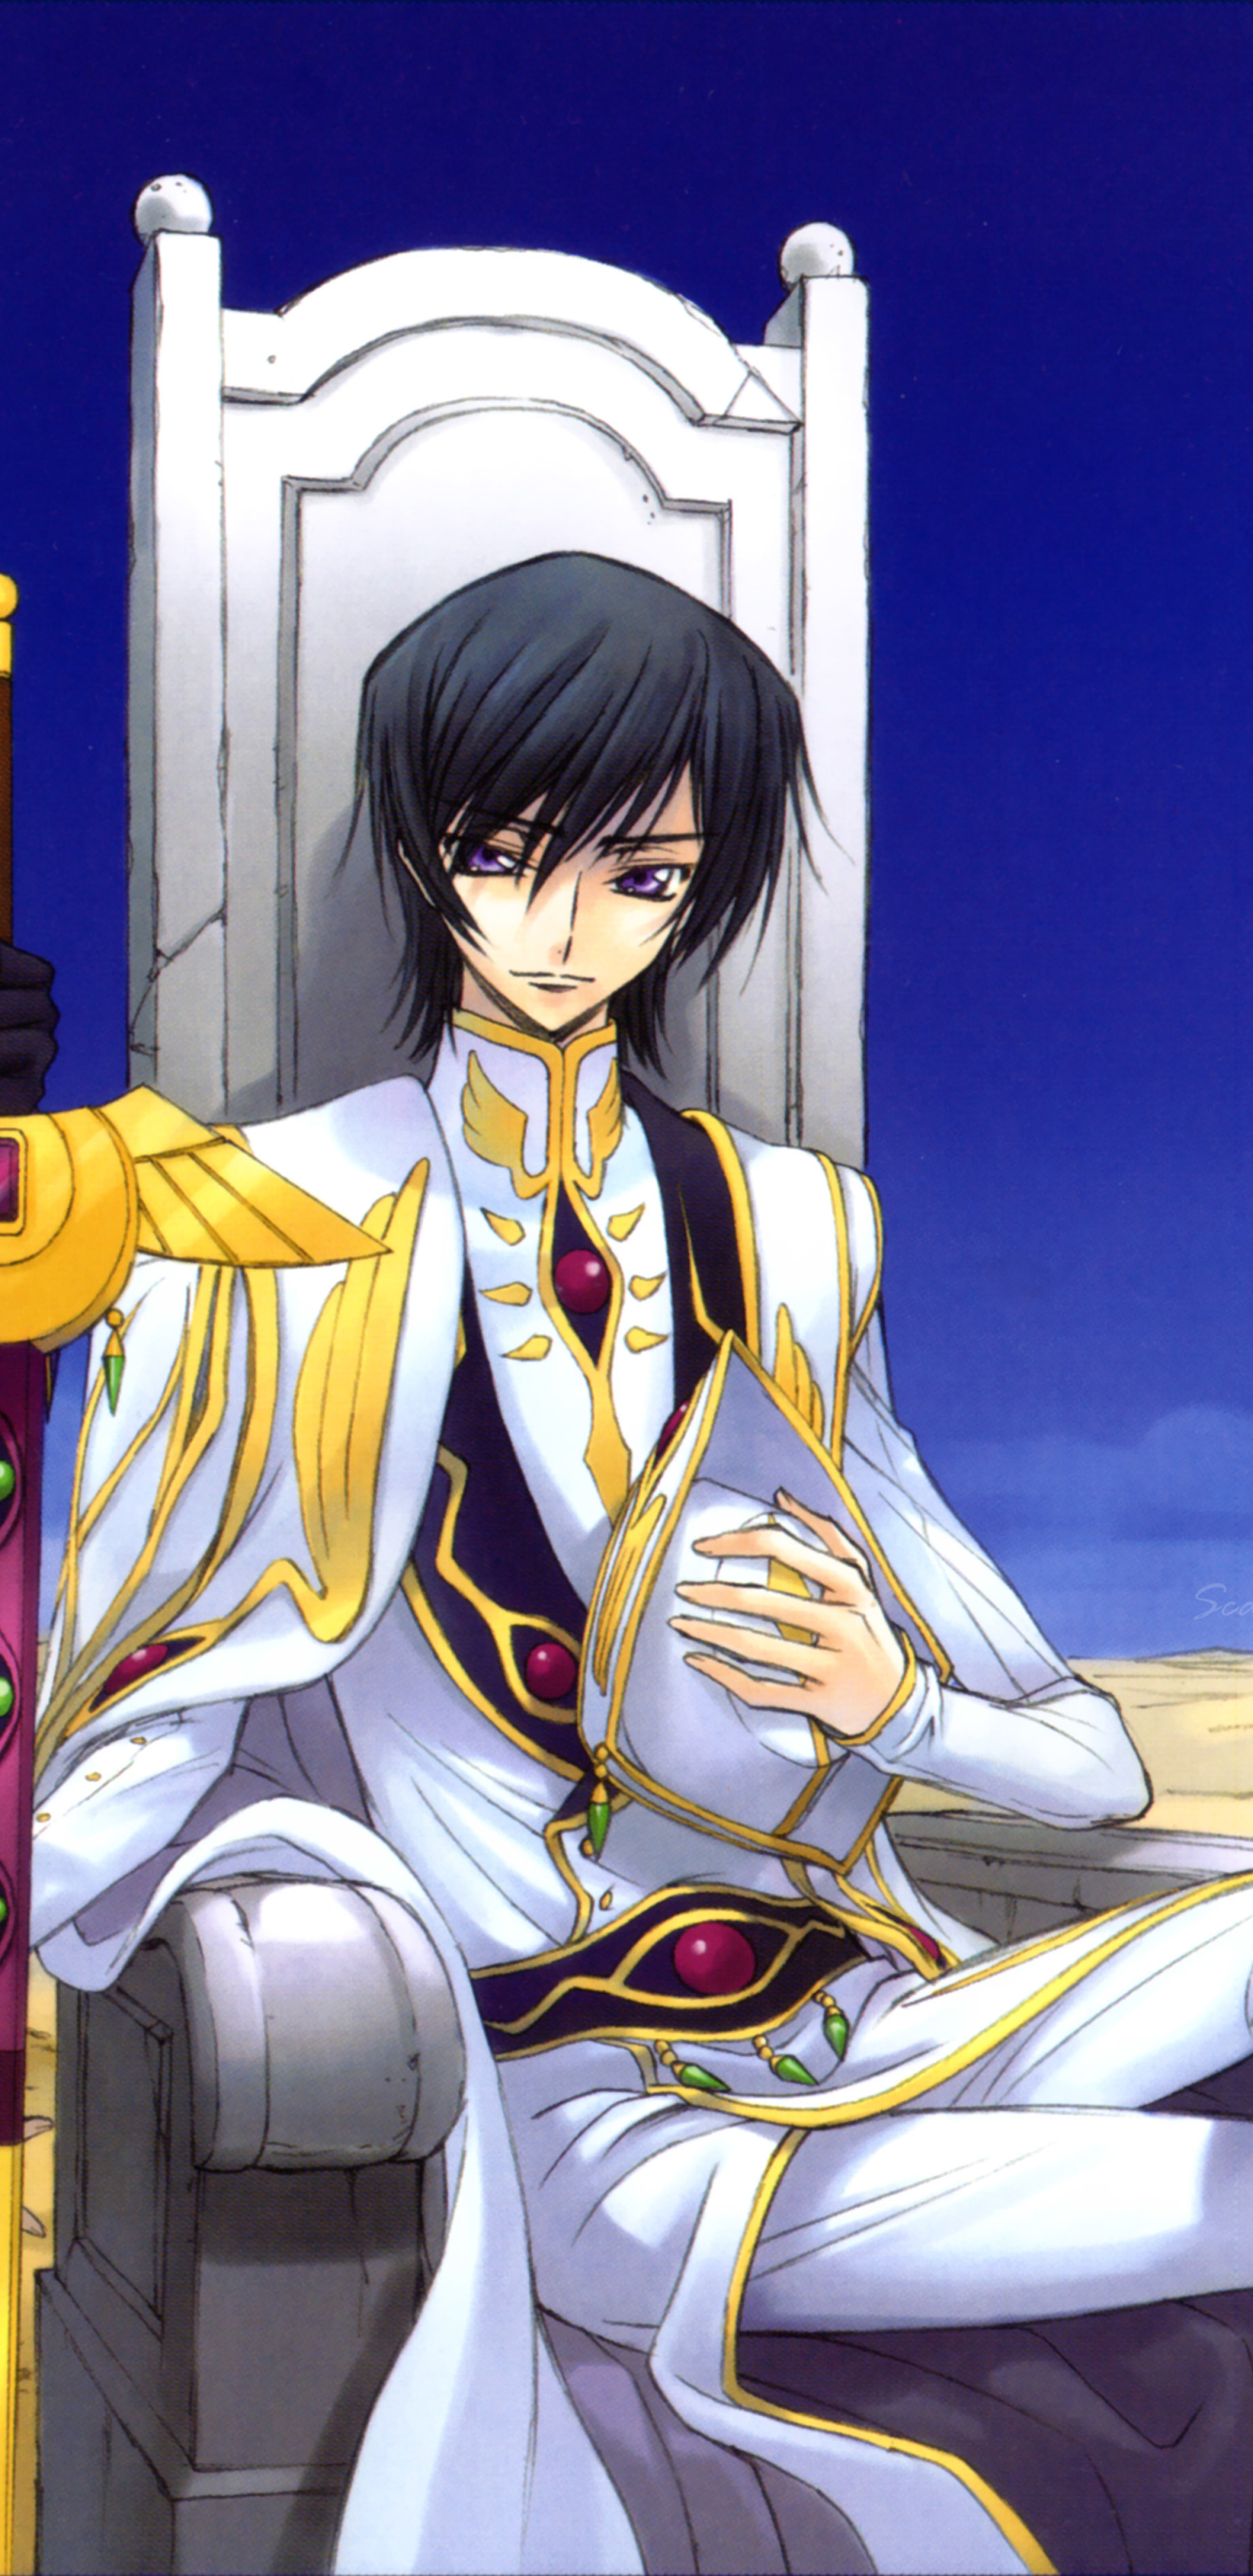 Wallpaper Code Geass, Lelouch Lamperouge, nunnally lamperouge, suzaku for  mobile and desktop, section прочее, resolution 2560x1600 - download